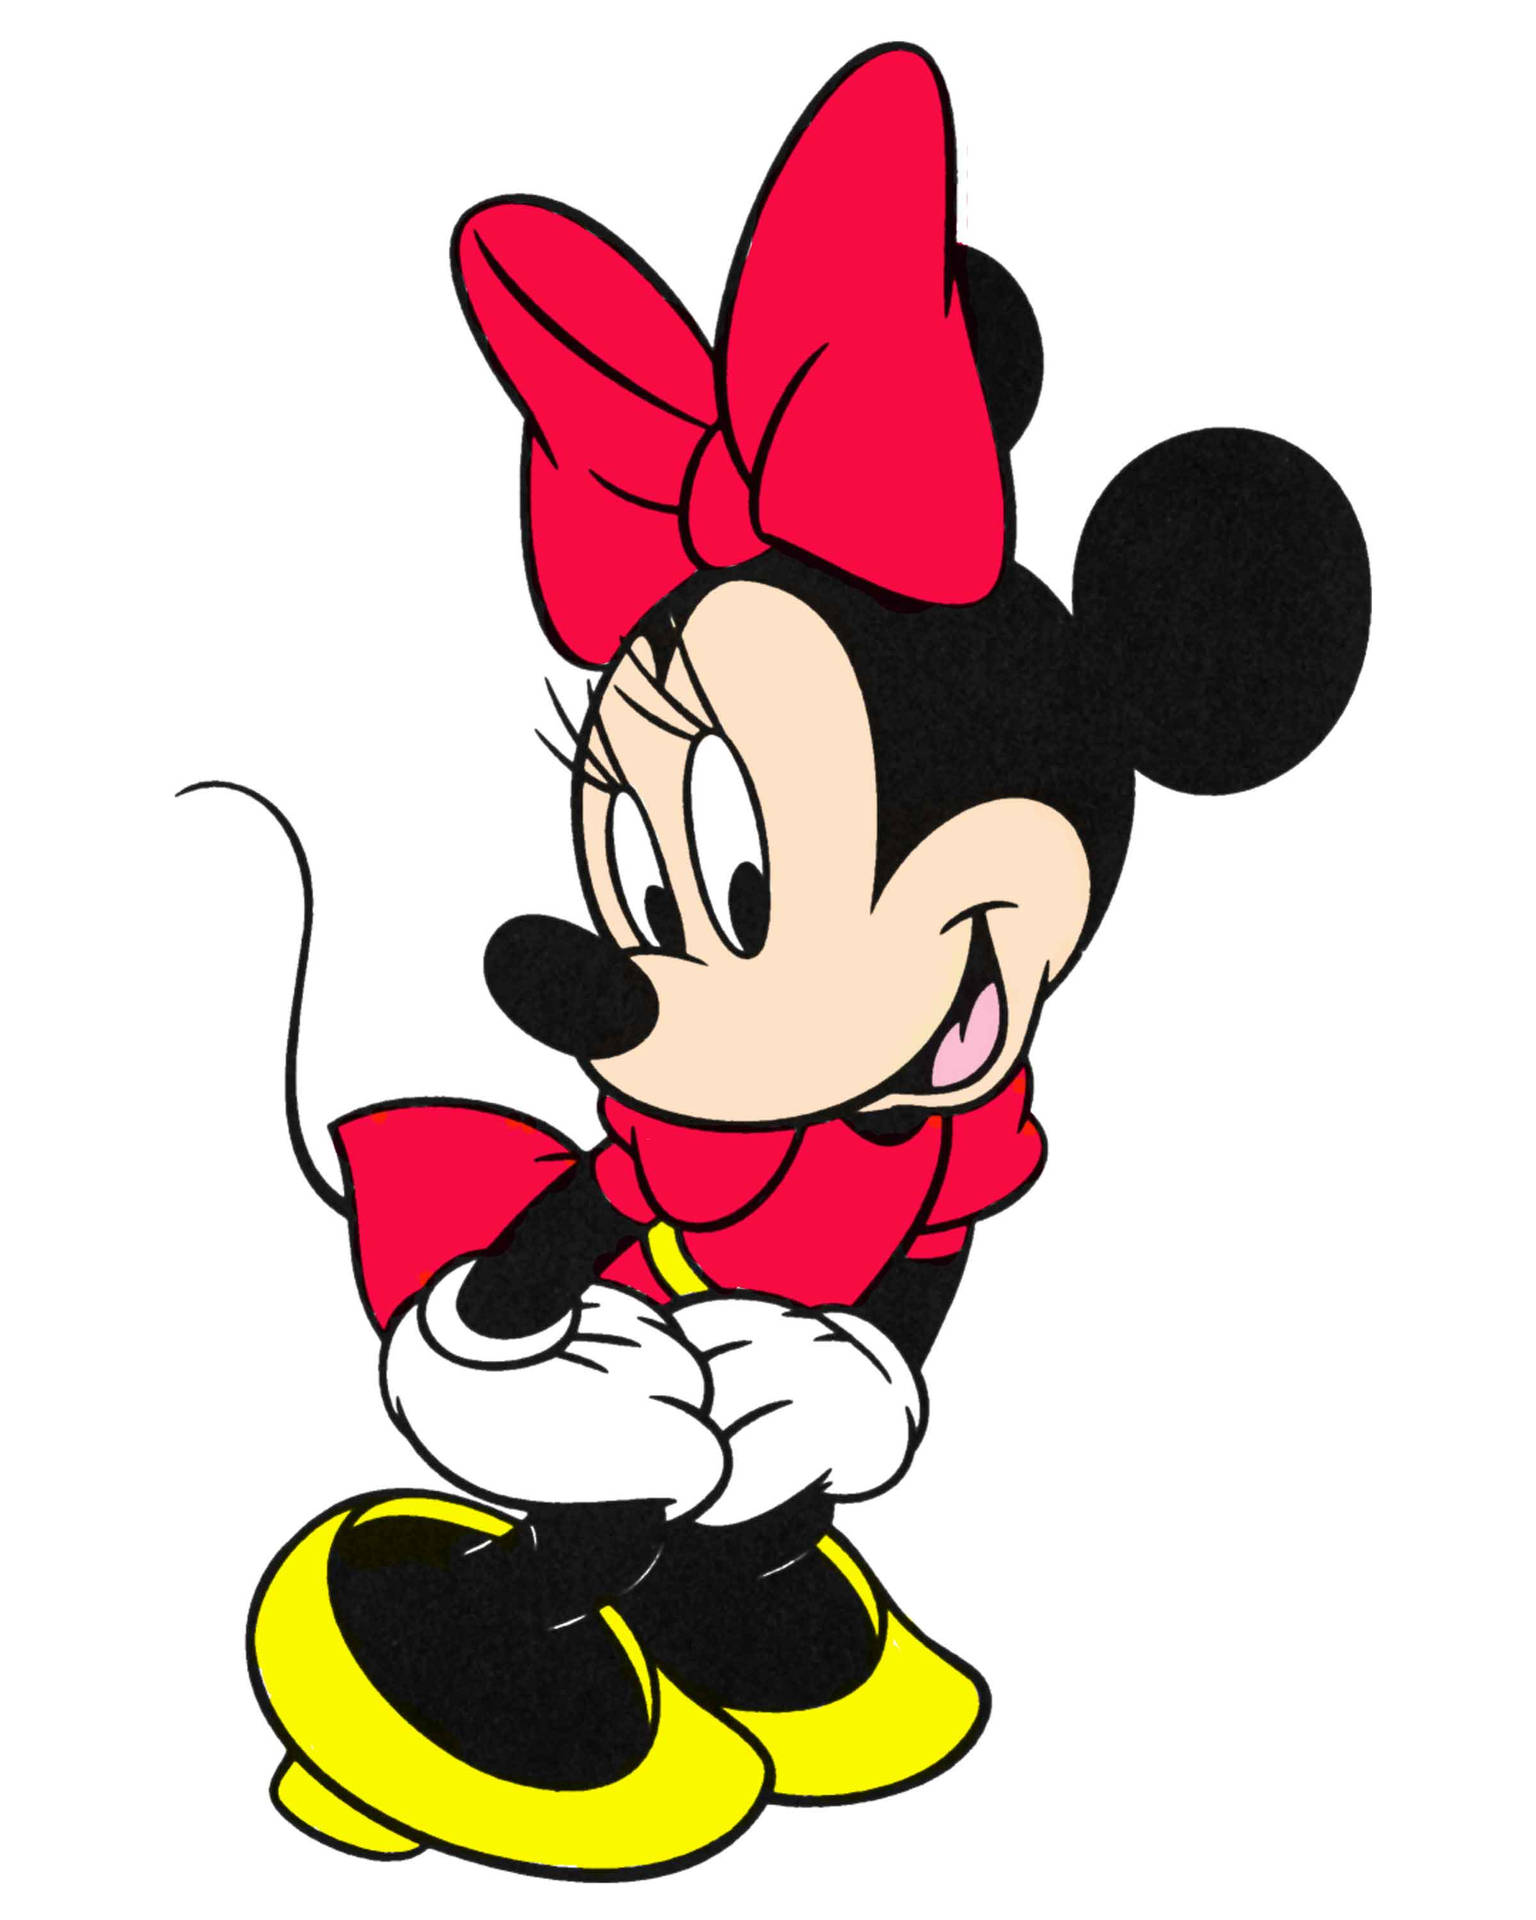 Minnie Mouse Posing Red Dress Wallpaper